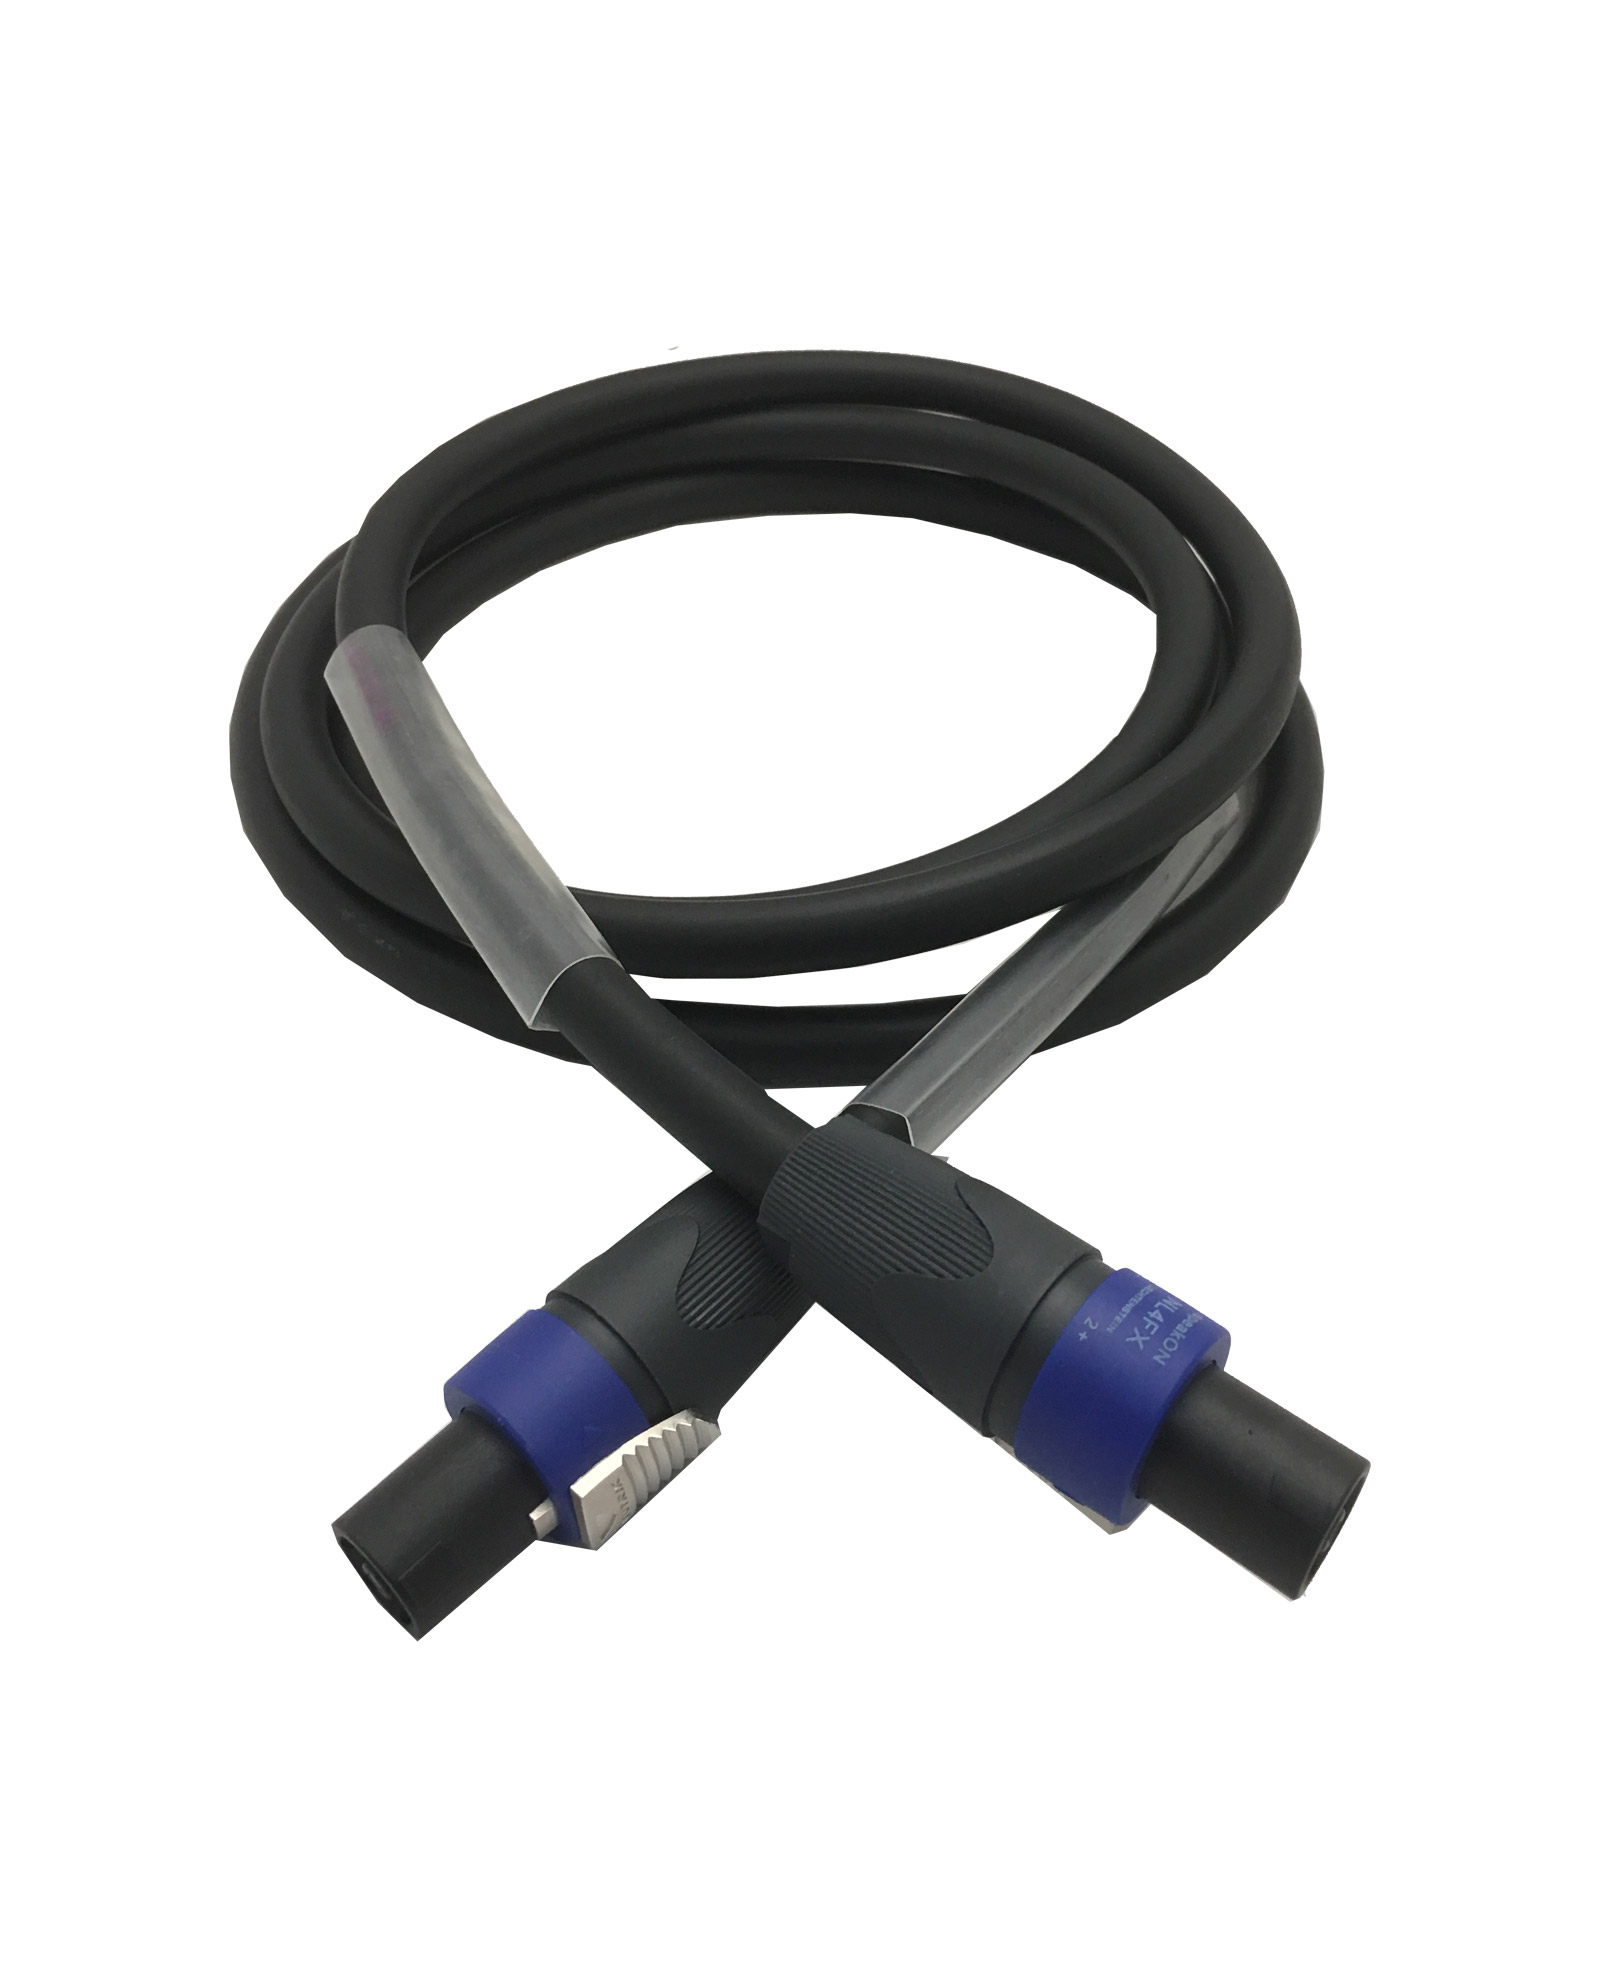 Nl4 Speaker Cable